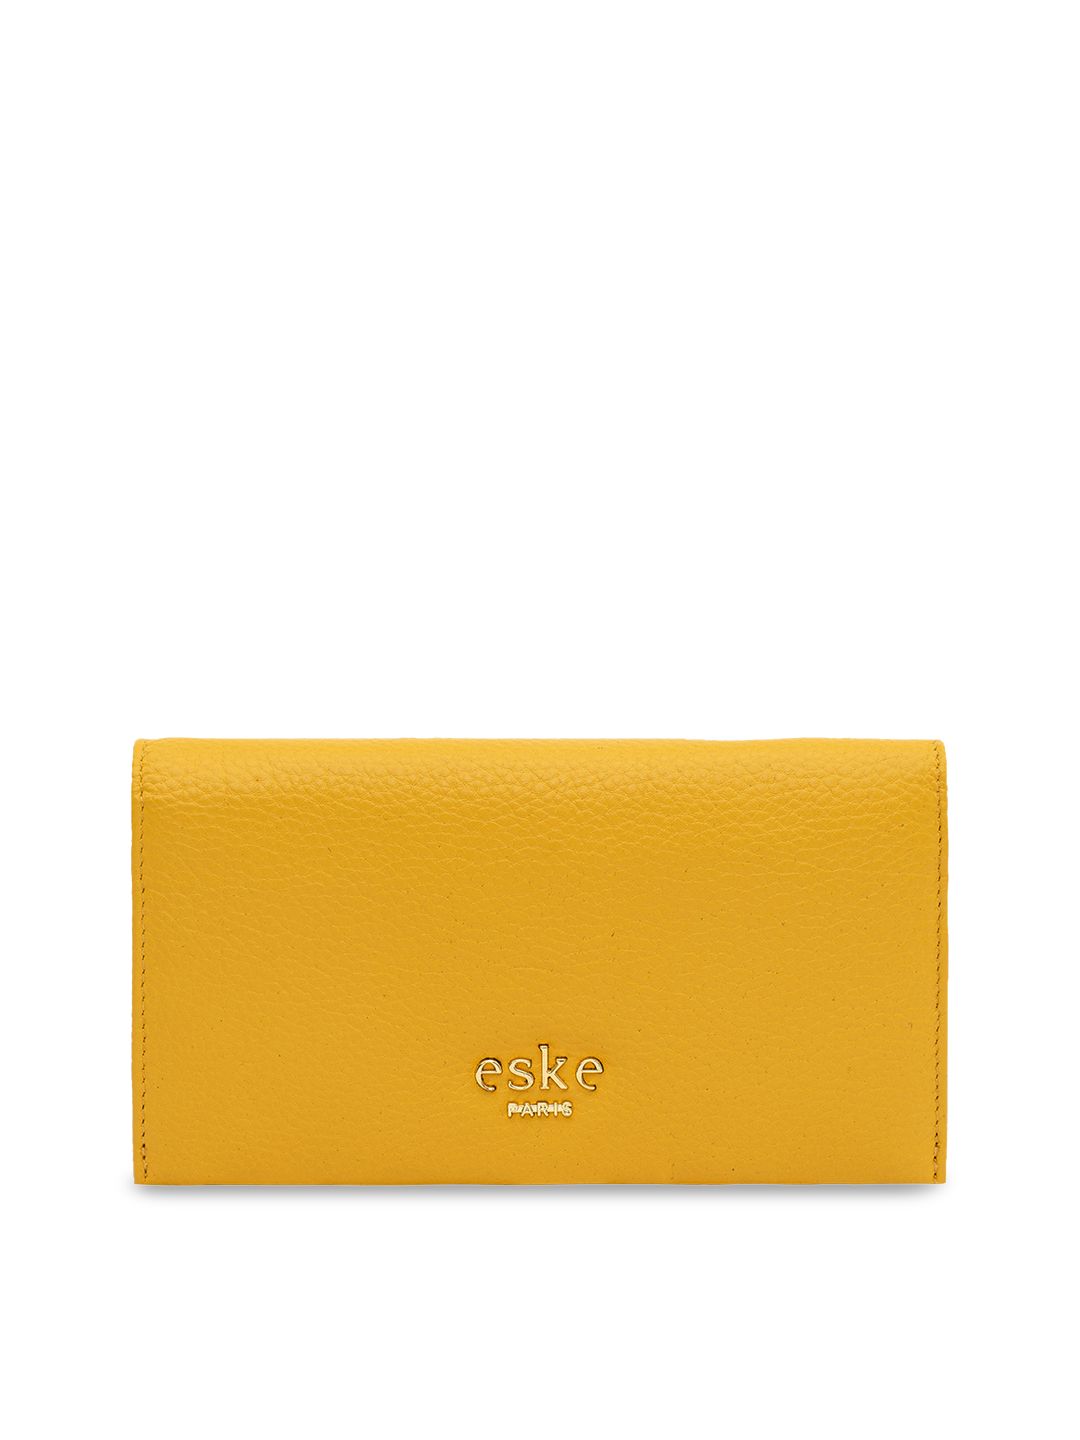 Eske Women Yellow Solid Leather Two Fold Wallet Price in India